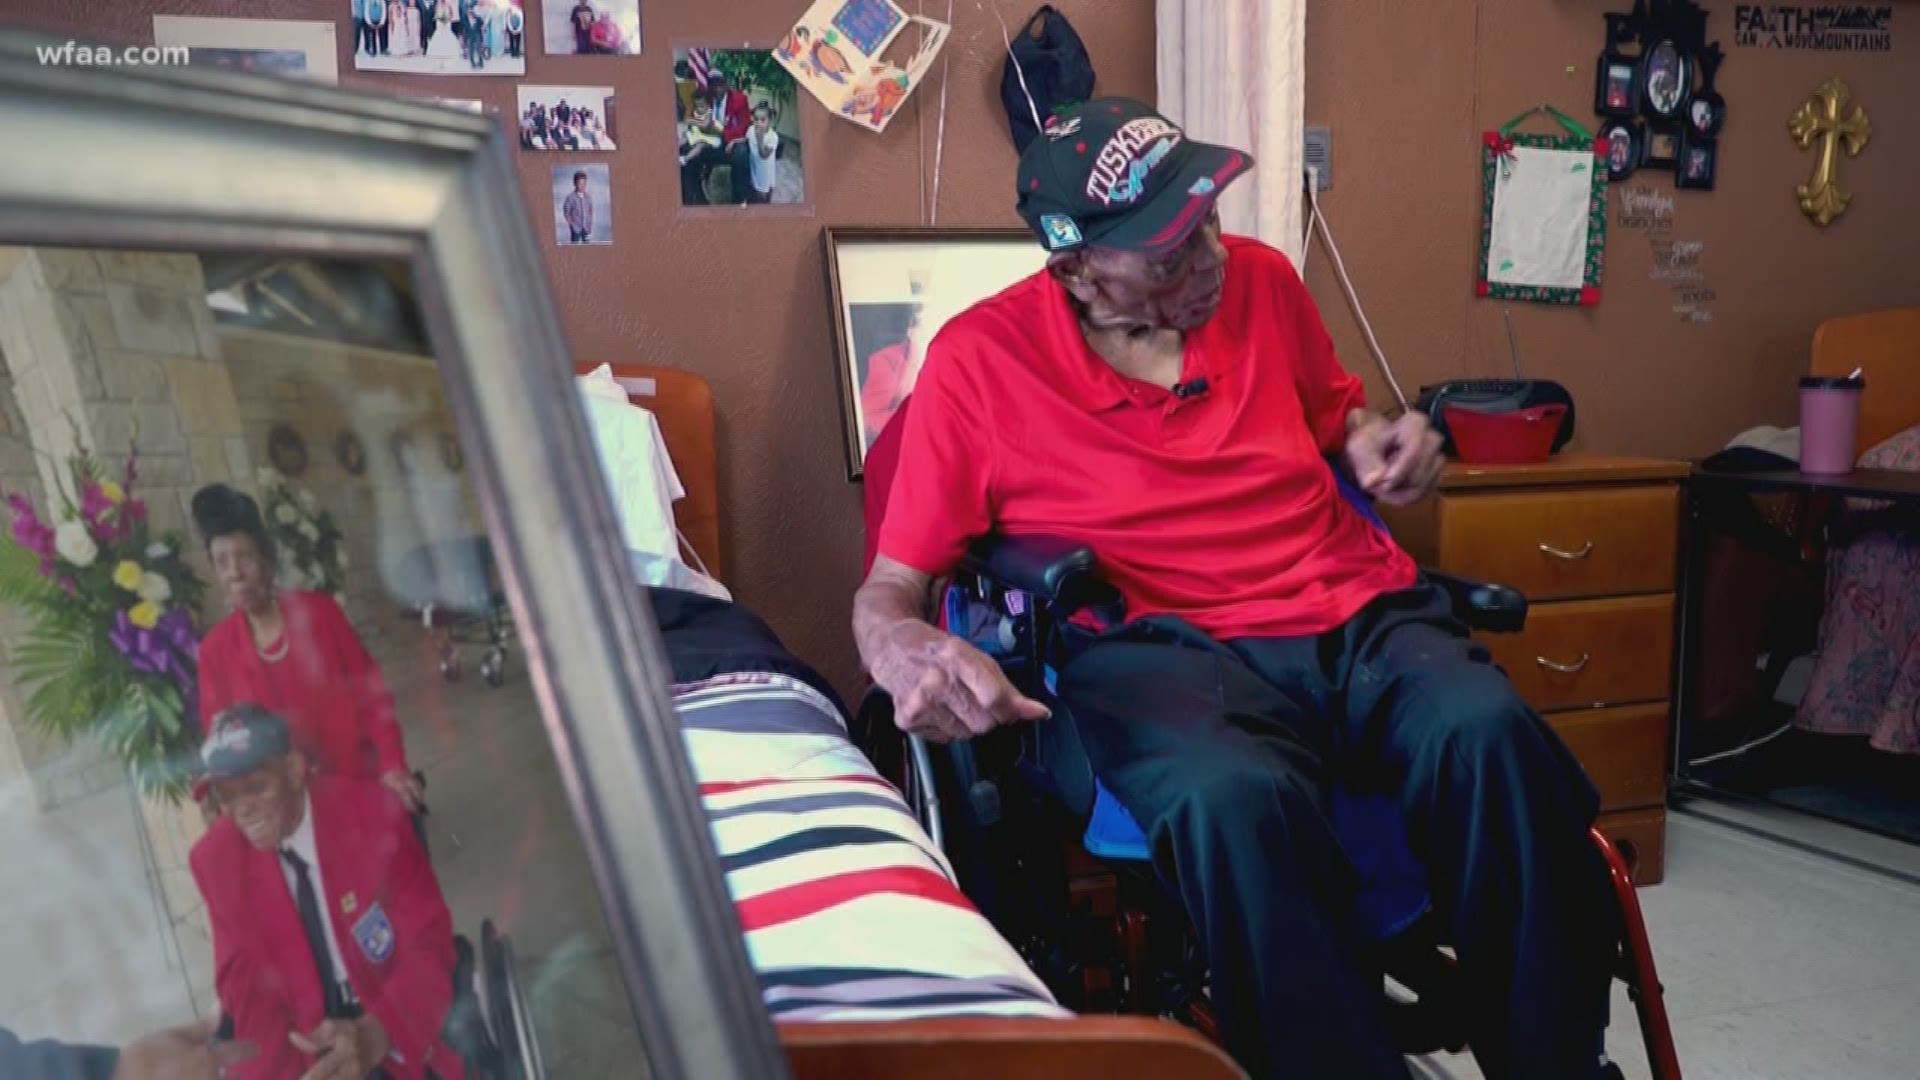 "I love it, being home," said Homer Hogues. Donors gave more than $90,000 to remodel the veteran's home so he can spend his final days with his wife.